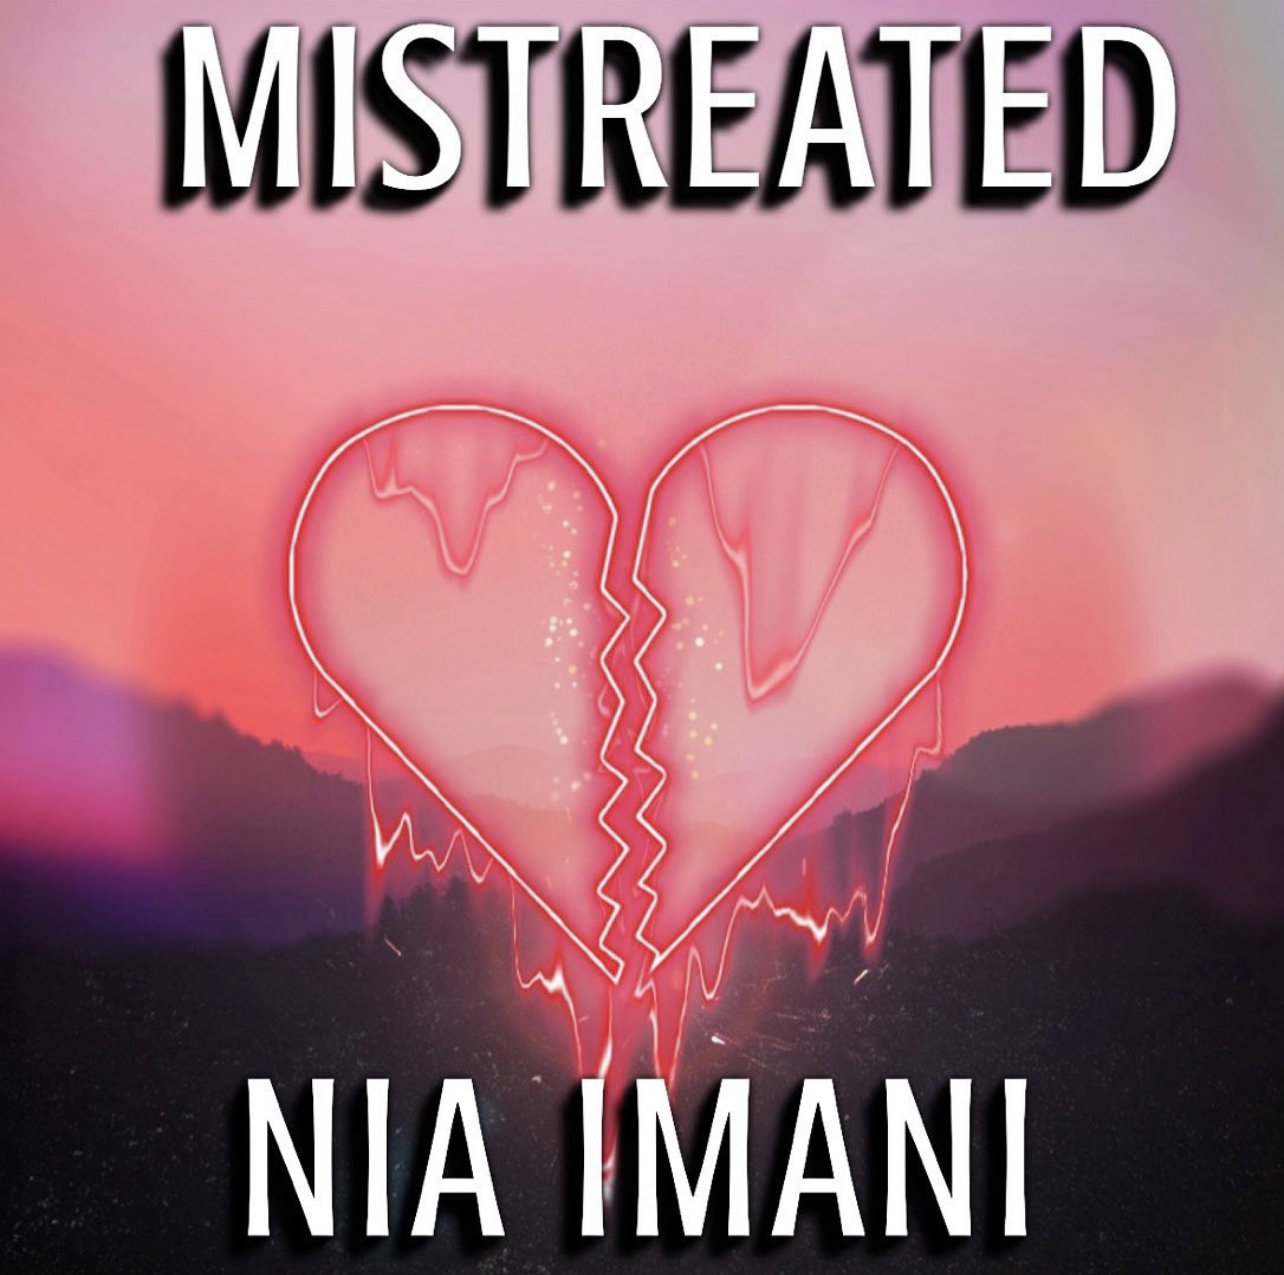 Art for MISTREATED by Nia Imani